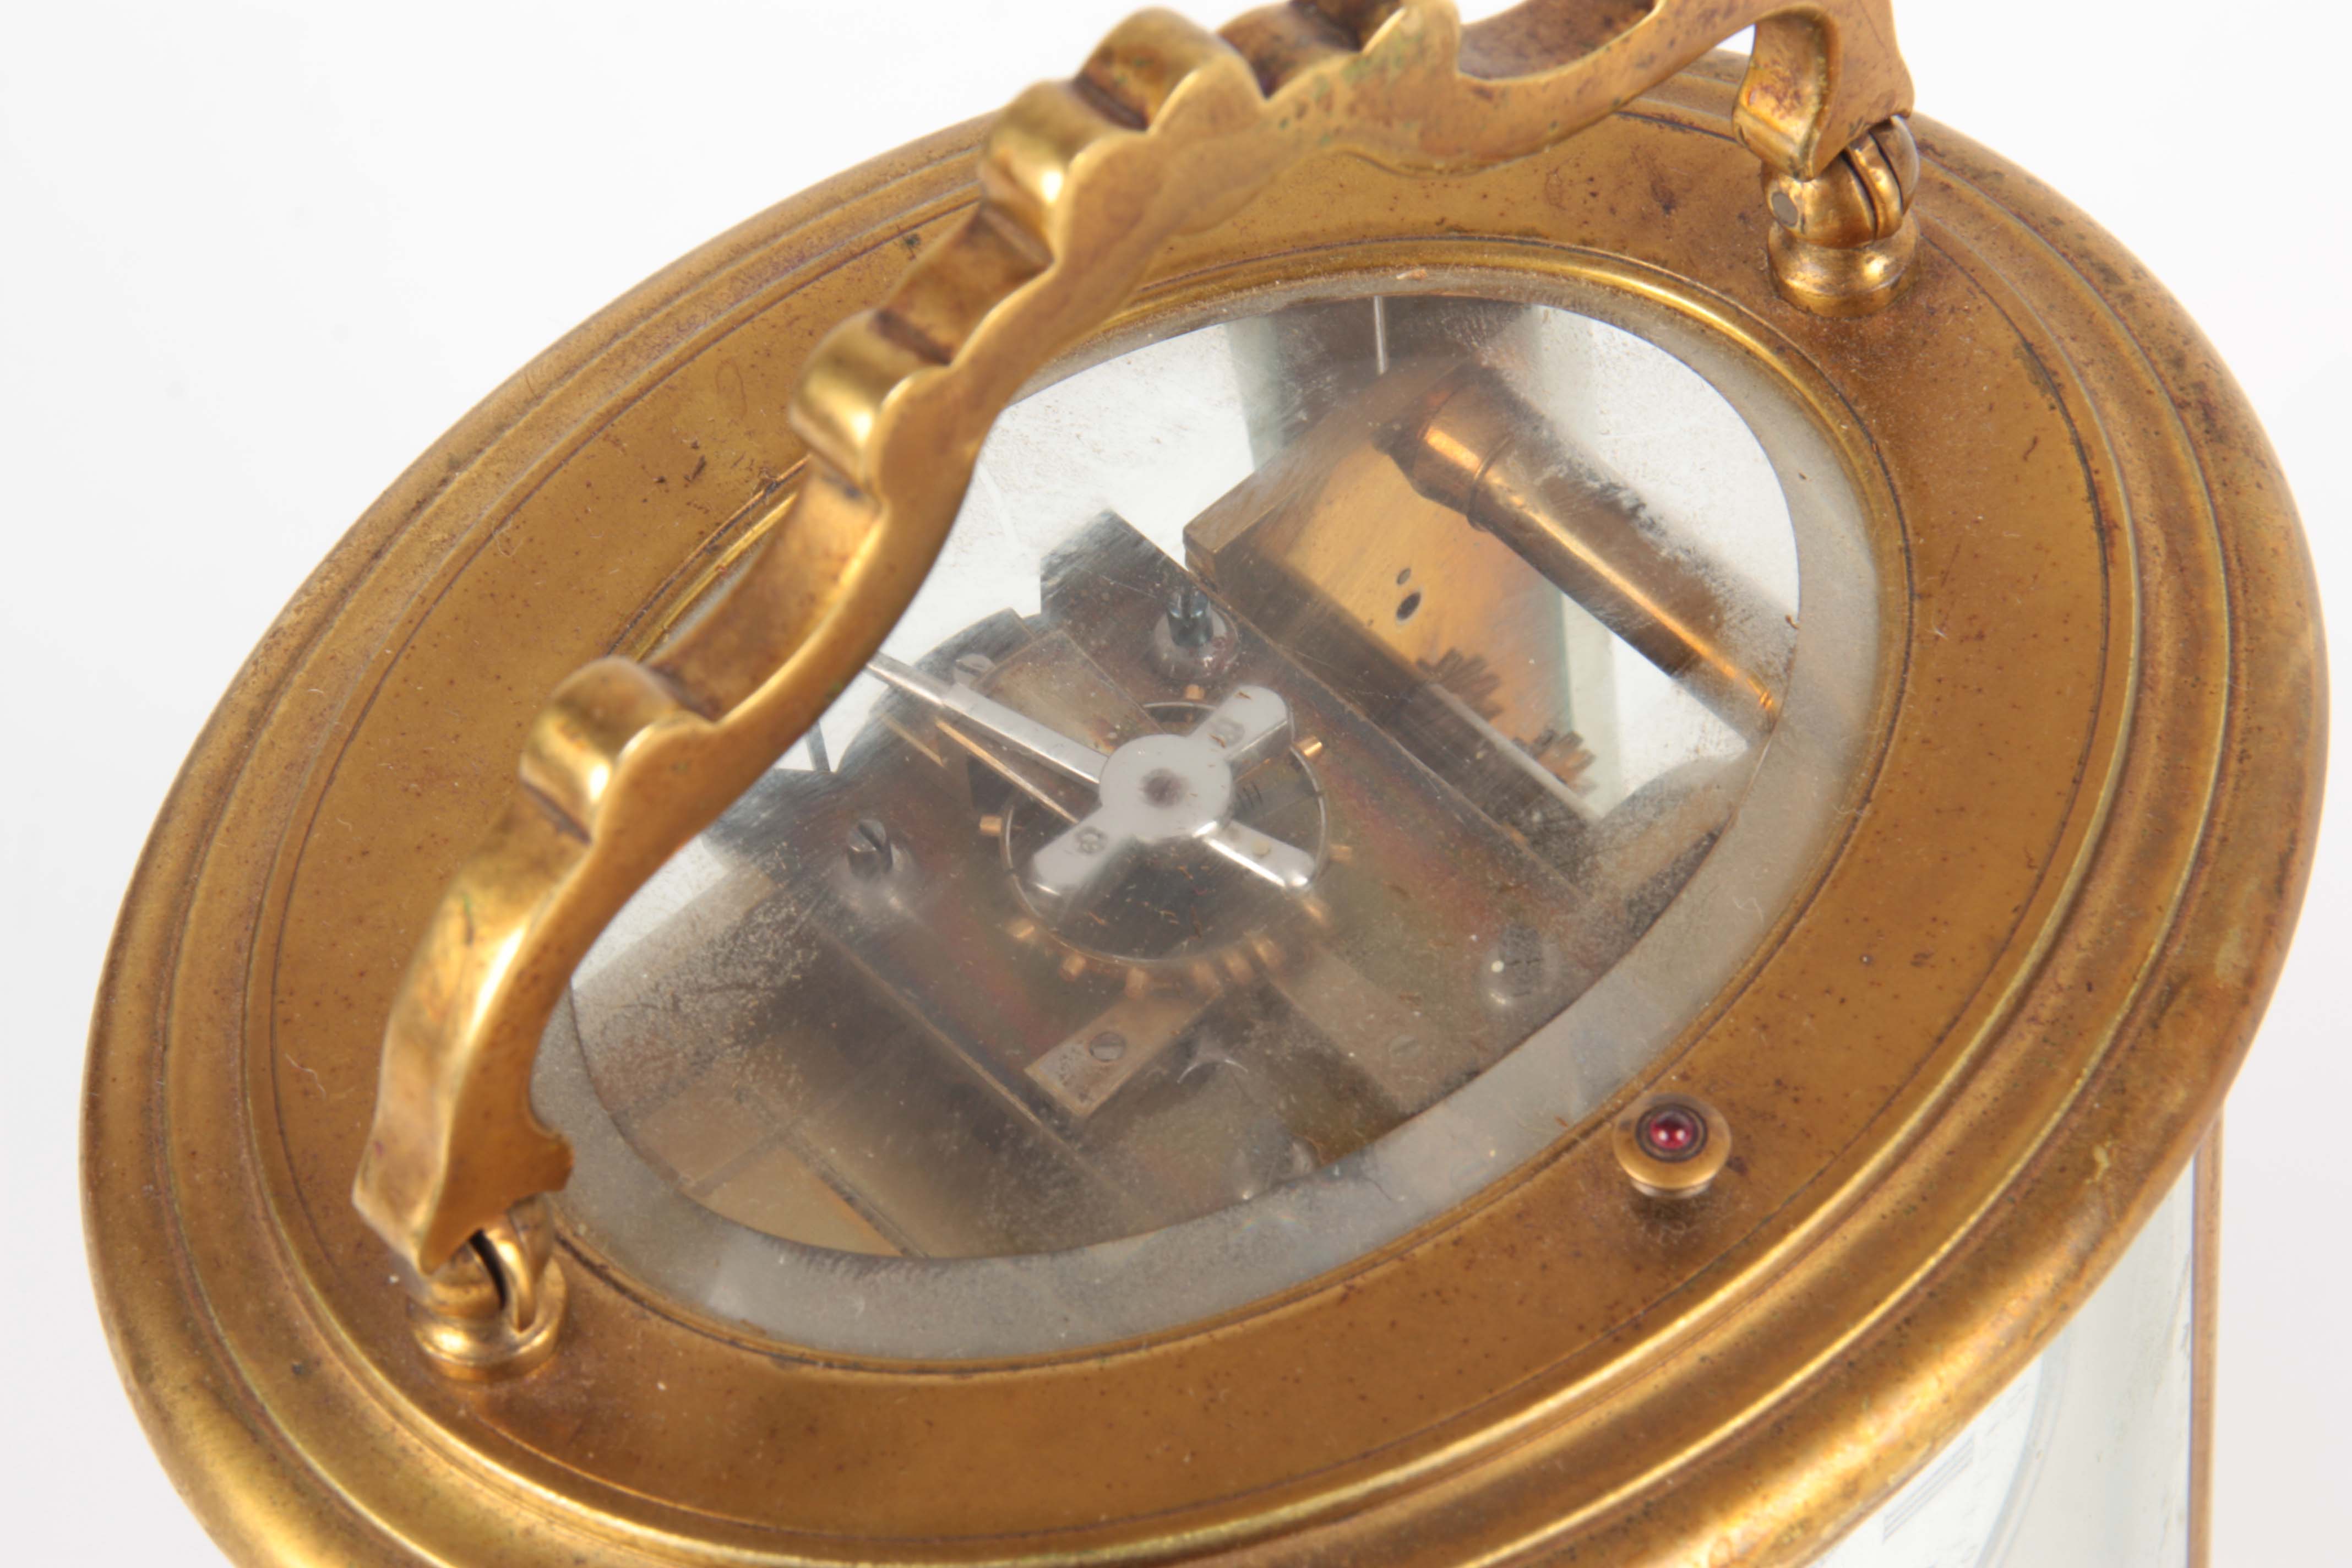 A LARGE LATE 19TH CENTURY FRENCH OVAL CASED REPEATING GRAND SONNERIE CARRIAGE CLOCK WITH CALENDAR - Image 10 of 12